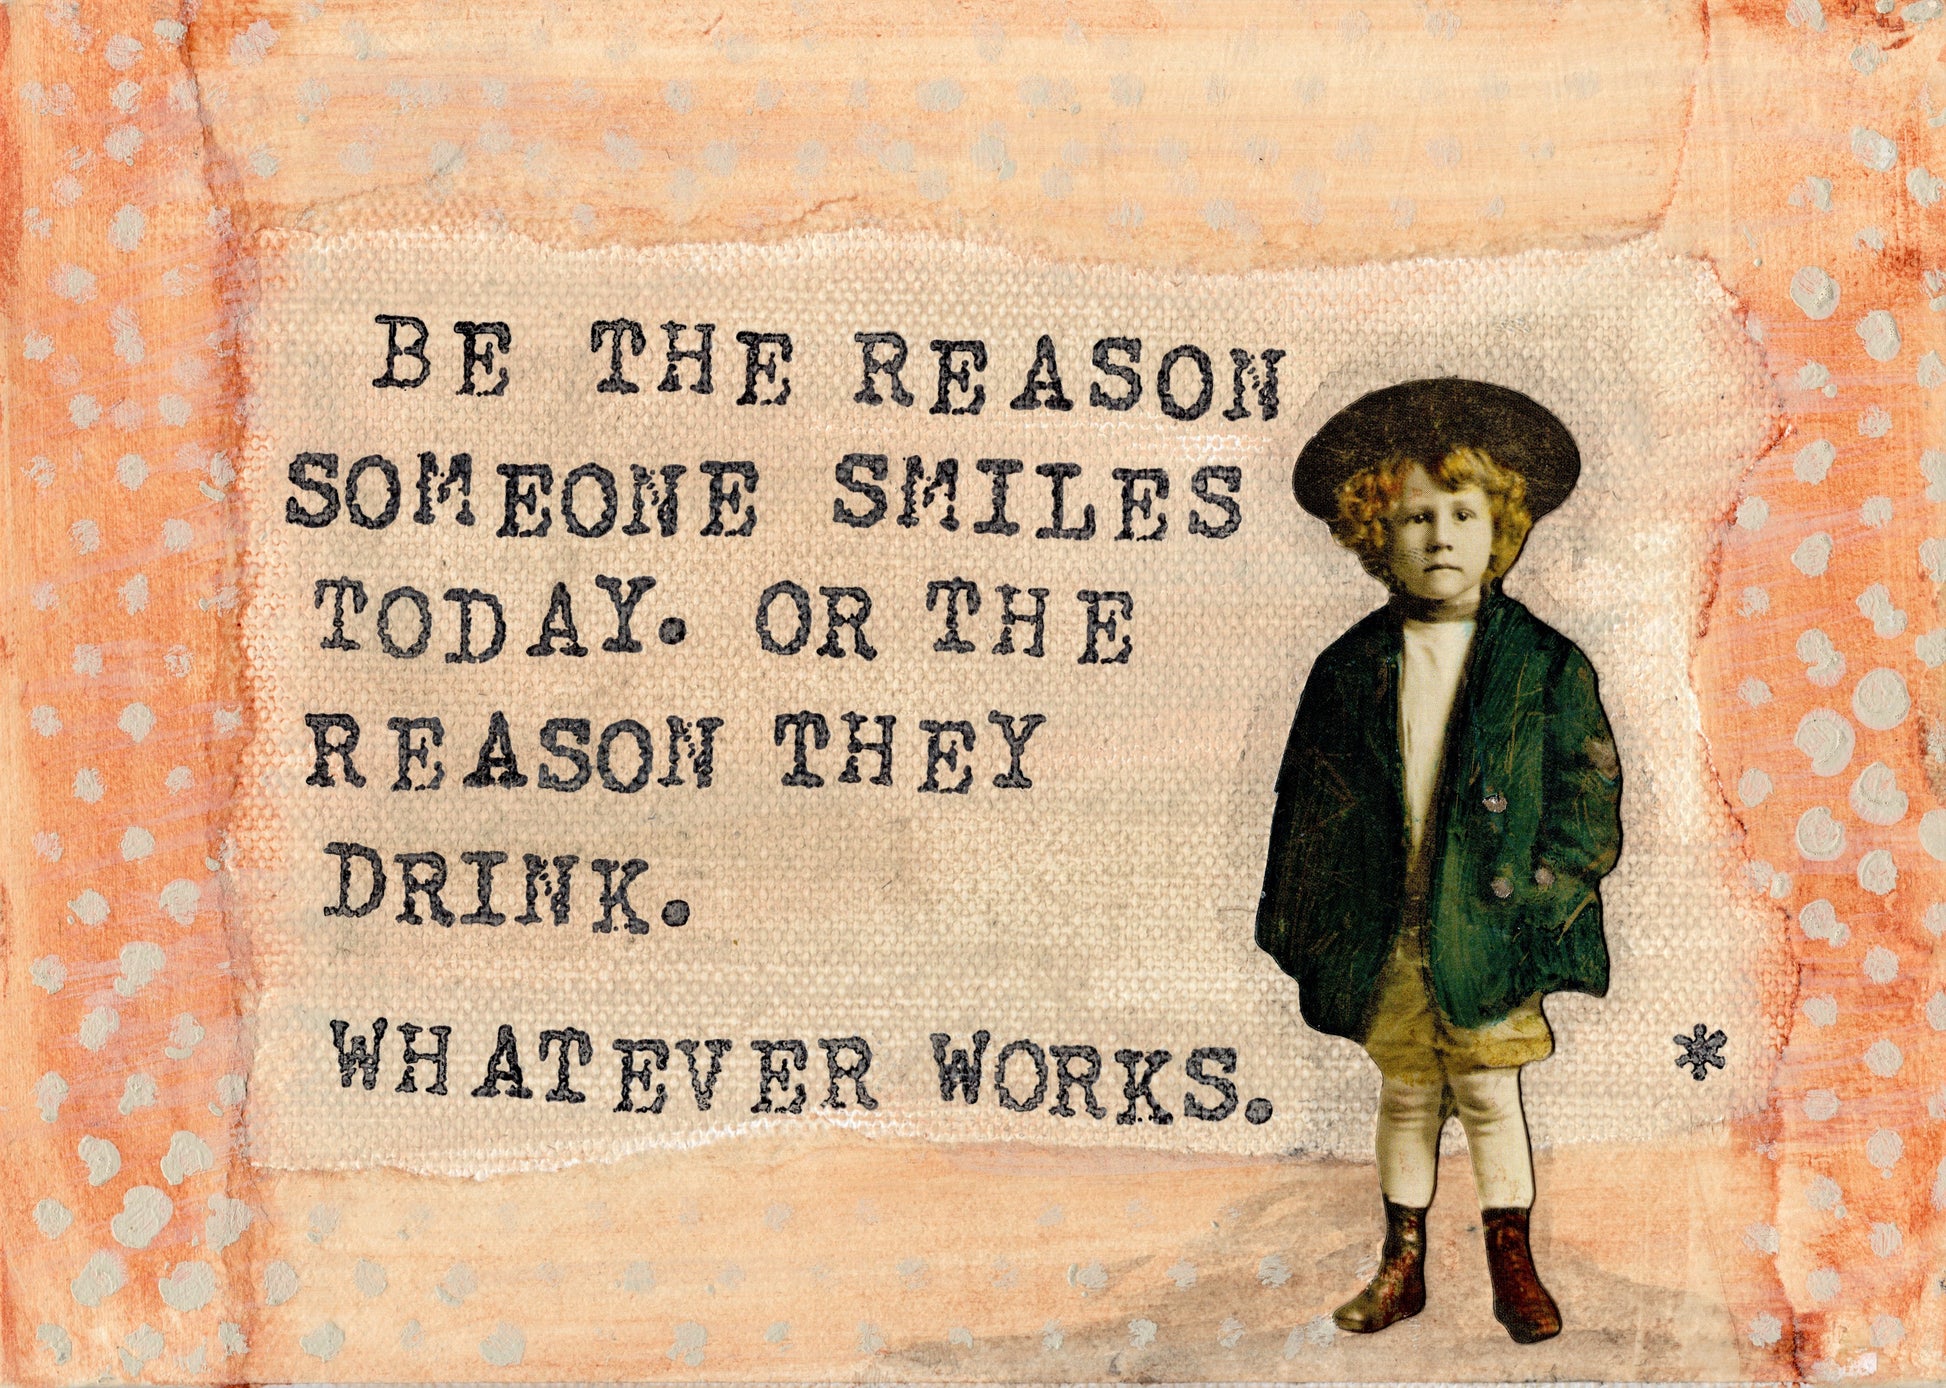 Be the reason someone smiles today. Or the reason they drink. Whatever works.